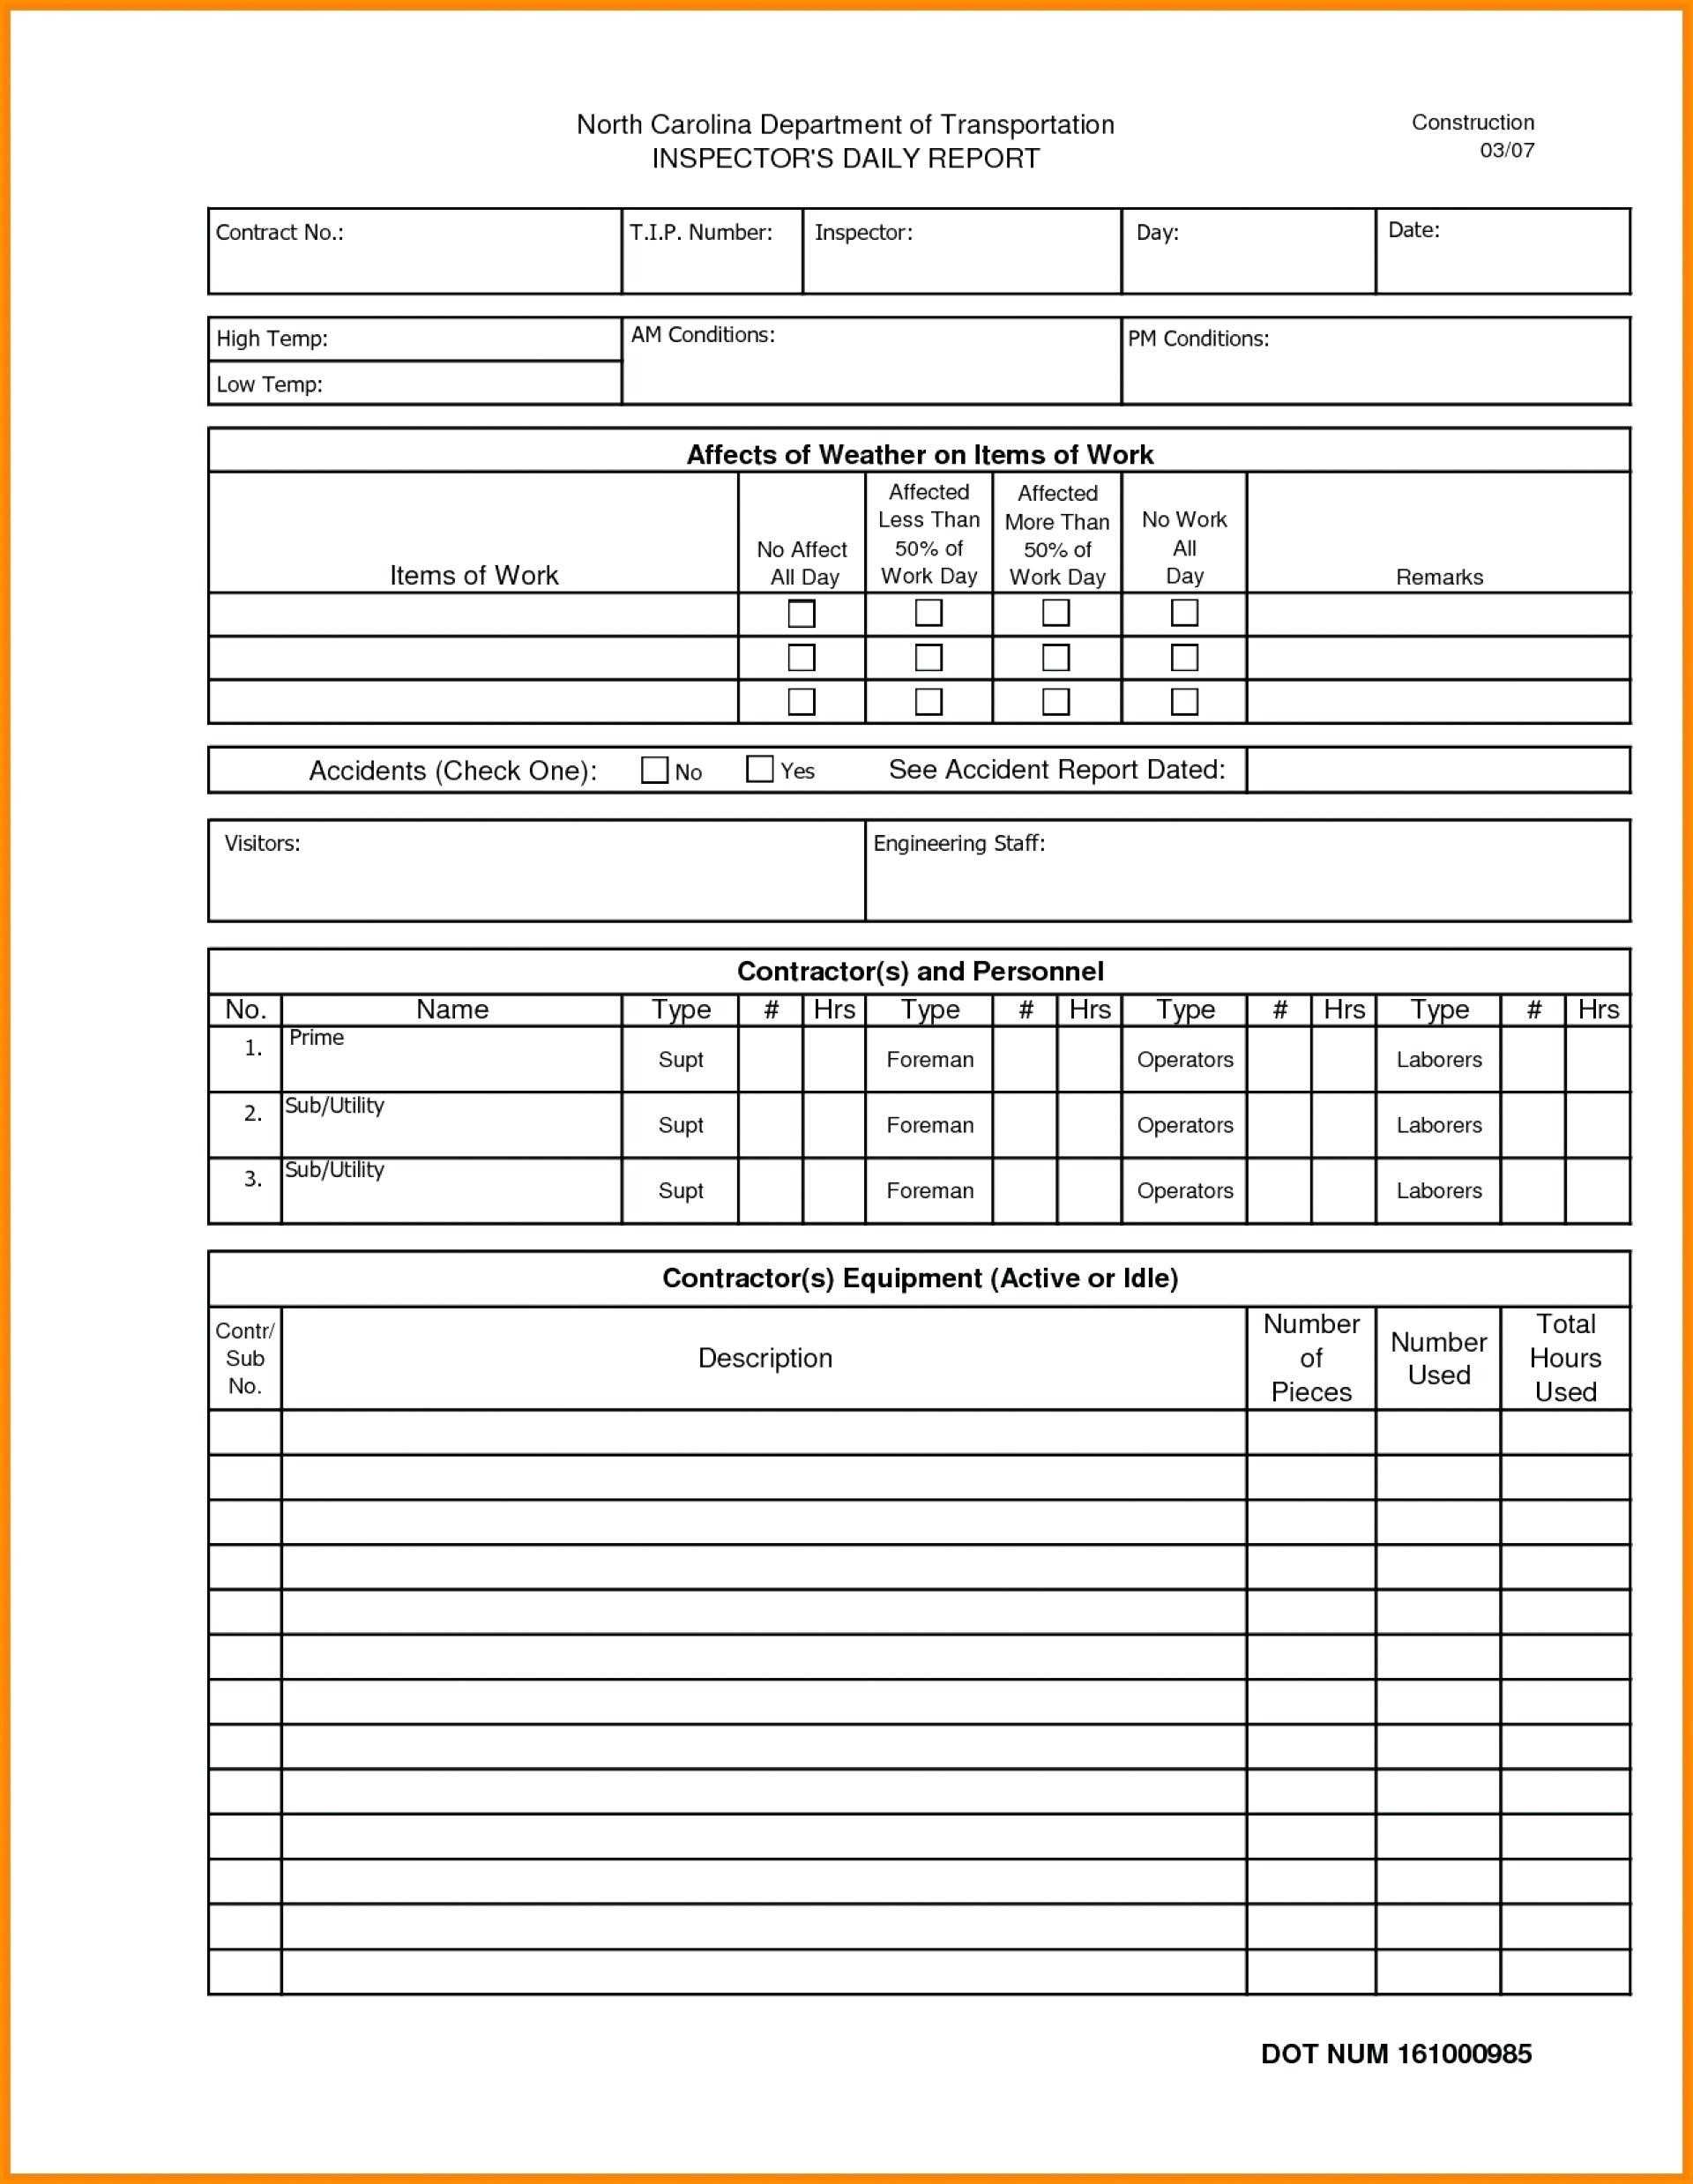 022 Construction Cost Report Template Excel Ideas Beautiful With Regard To Construction Cost Report Template